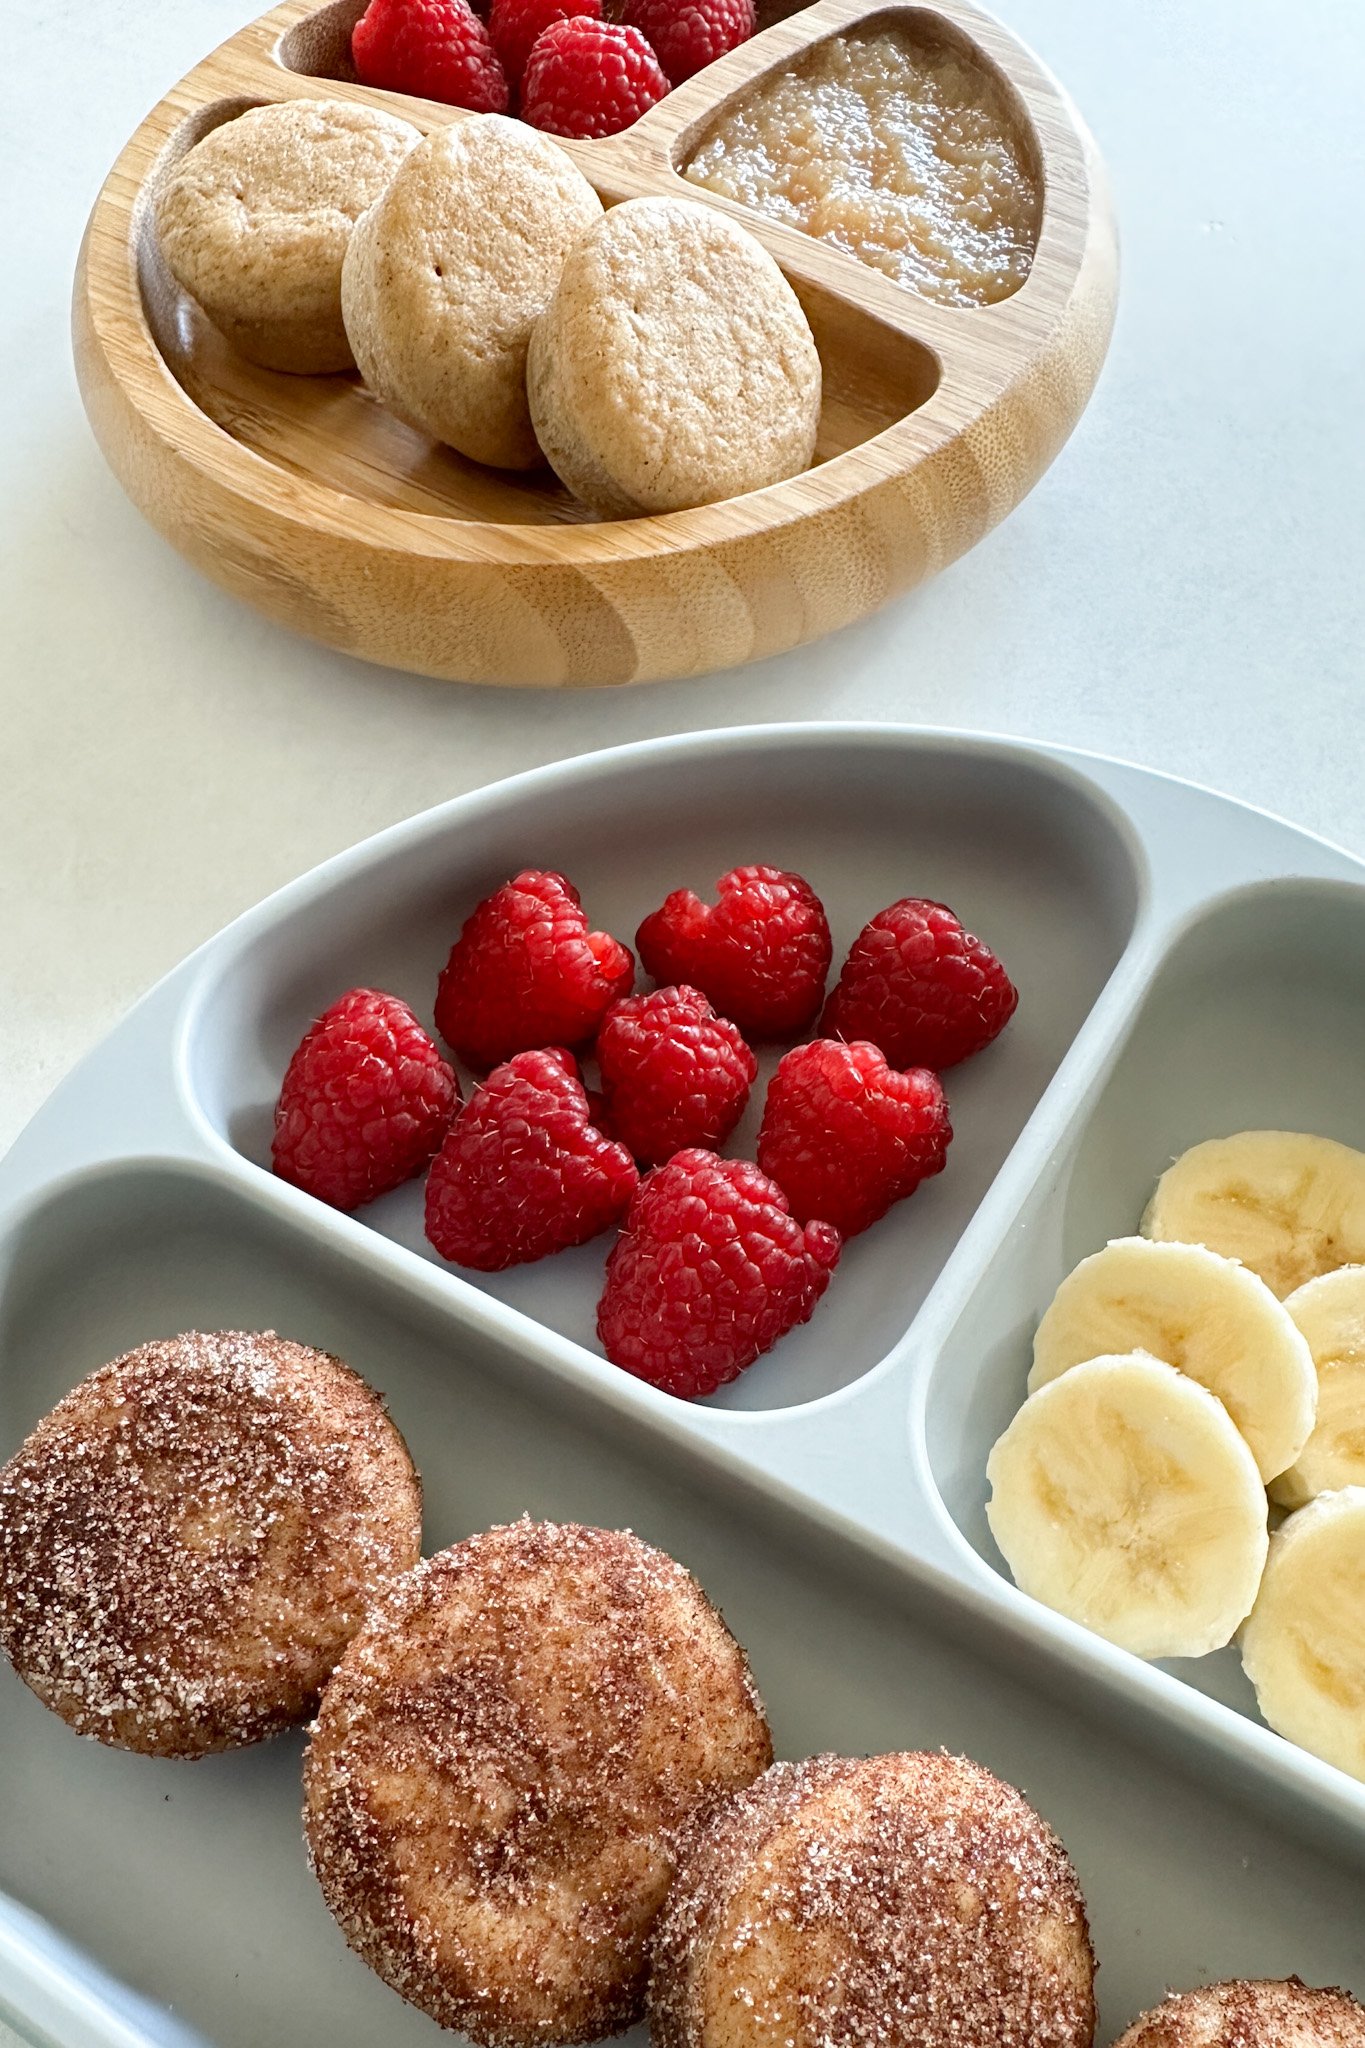 Cinnamon muffins served with fruits.